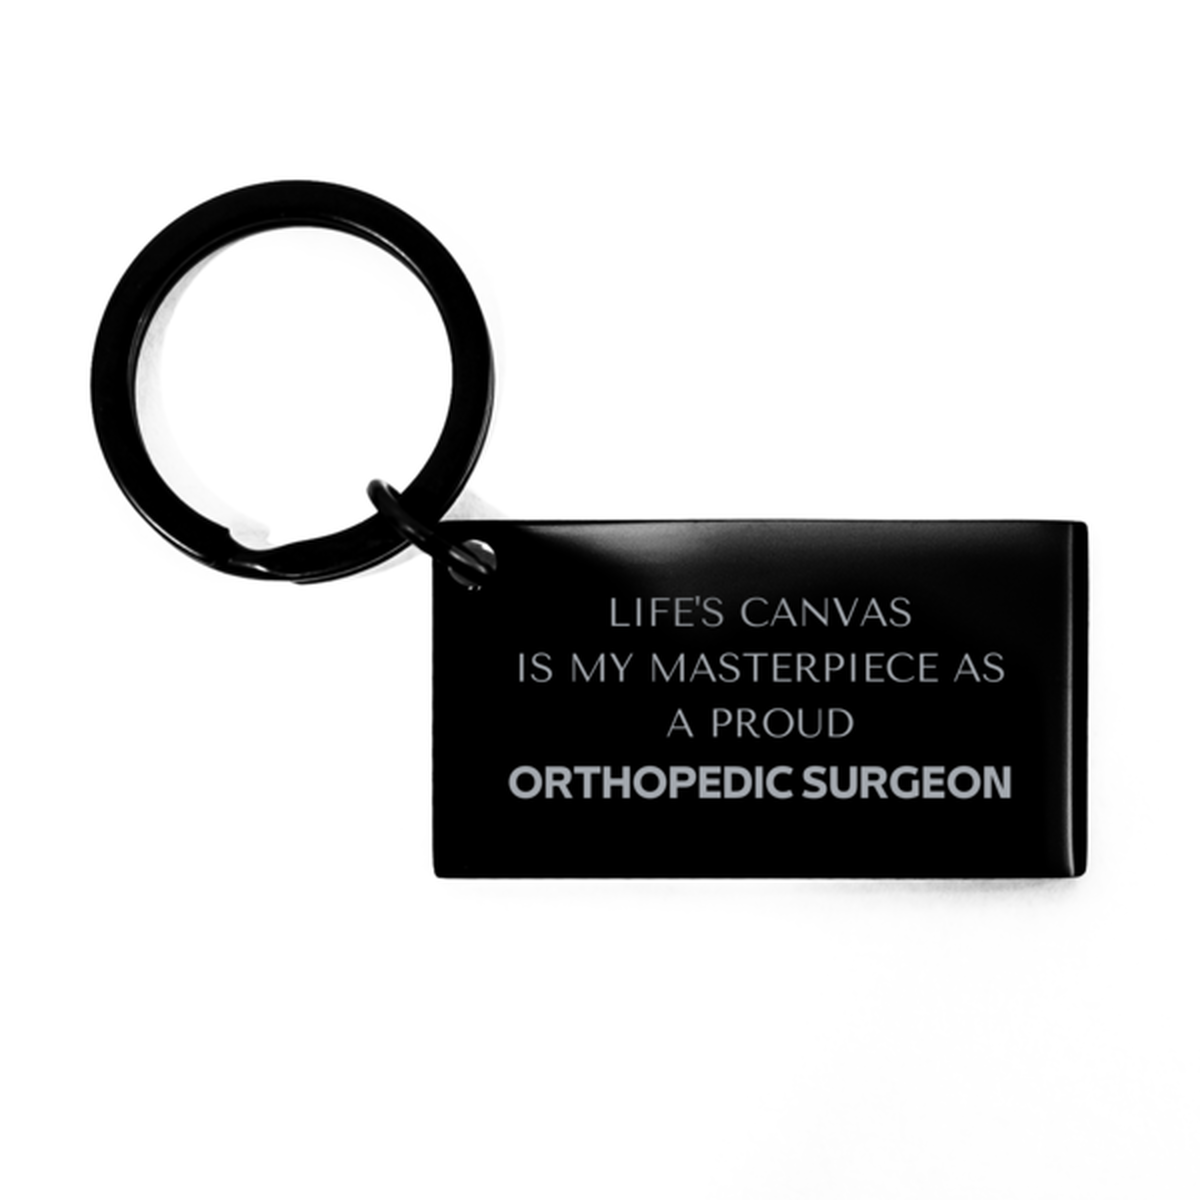 Proud Orthopedic Surgeon Gifts, Life's canvas is my masterpiece, Epic Birthday Christmas Unique Keychain For Orthopedic Surgeon, Coworkers, Men, Women, Friends